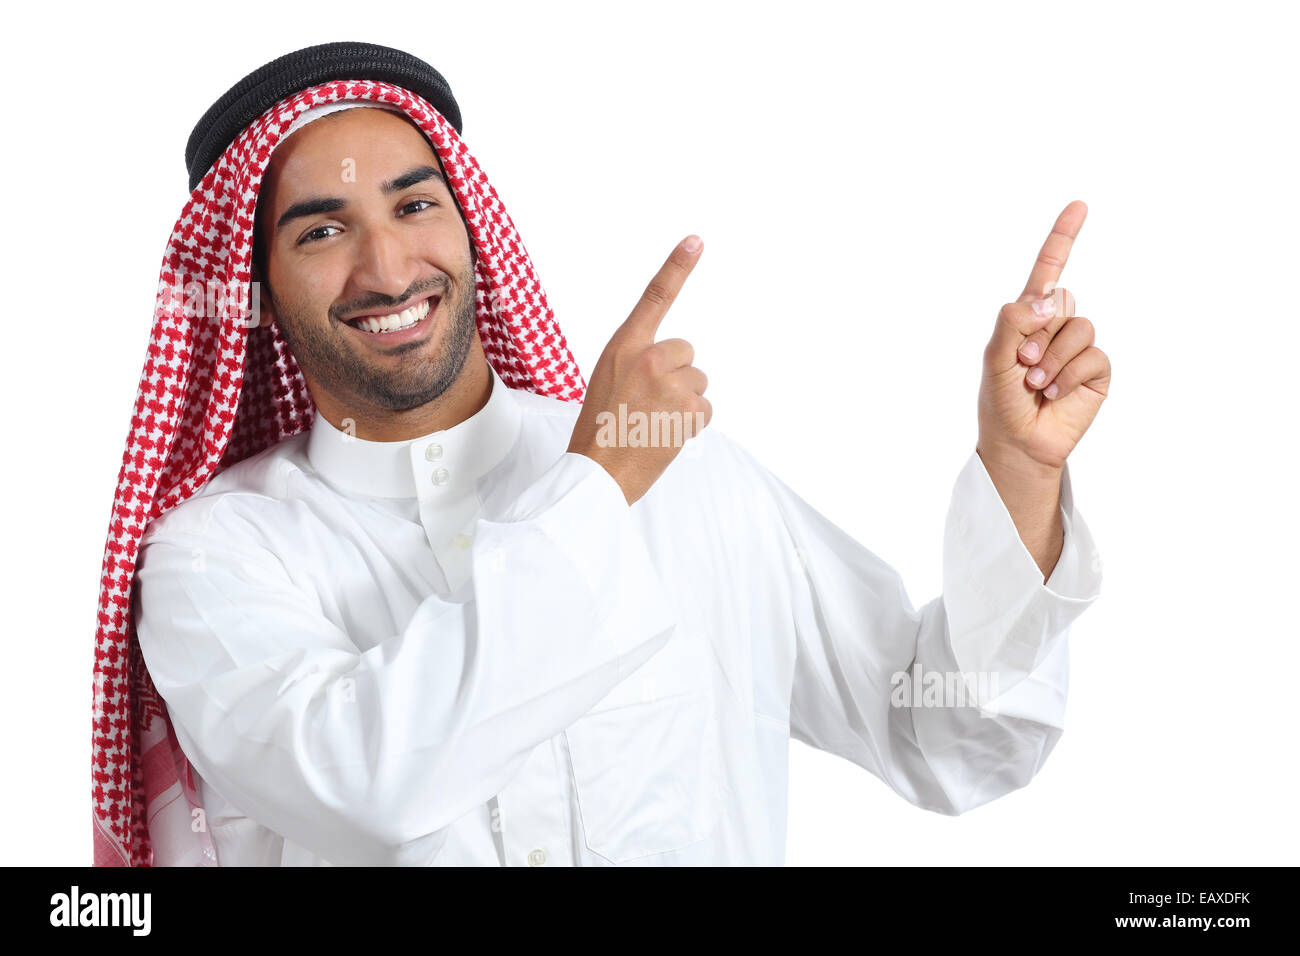 Arab saudi presenter man presenting pointing at side isolated on a white background Stock Photo